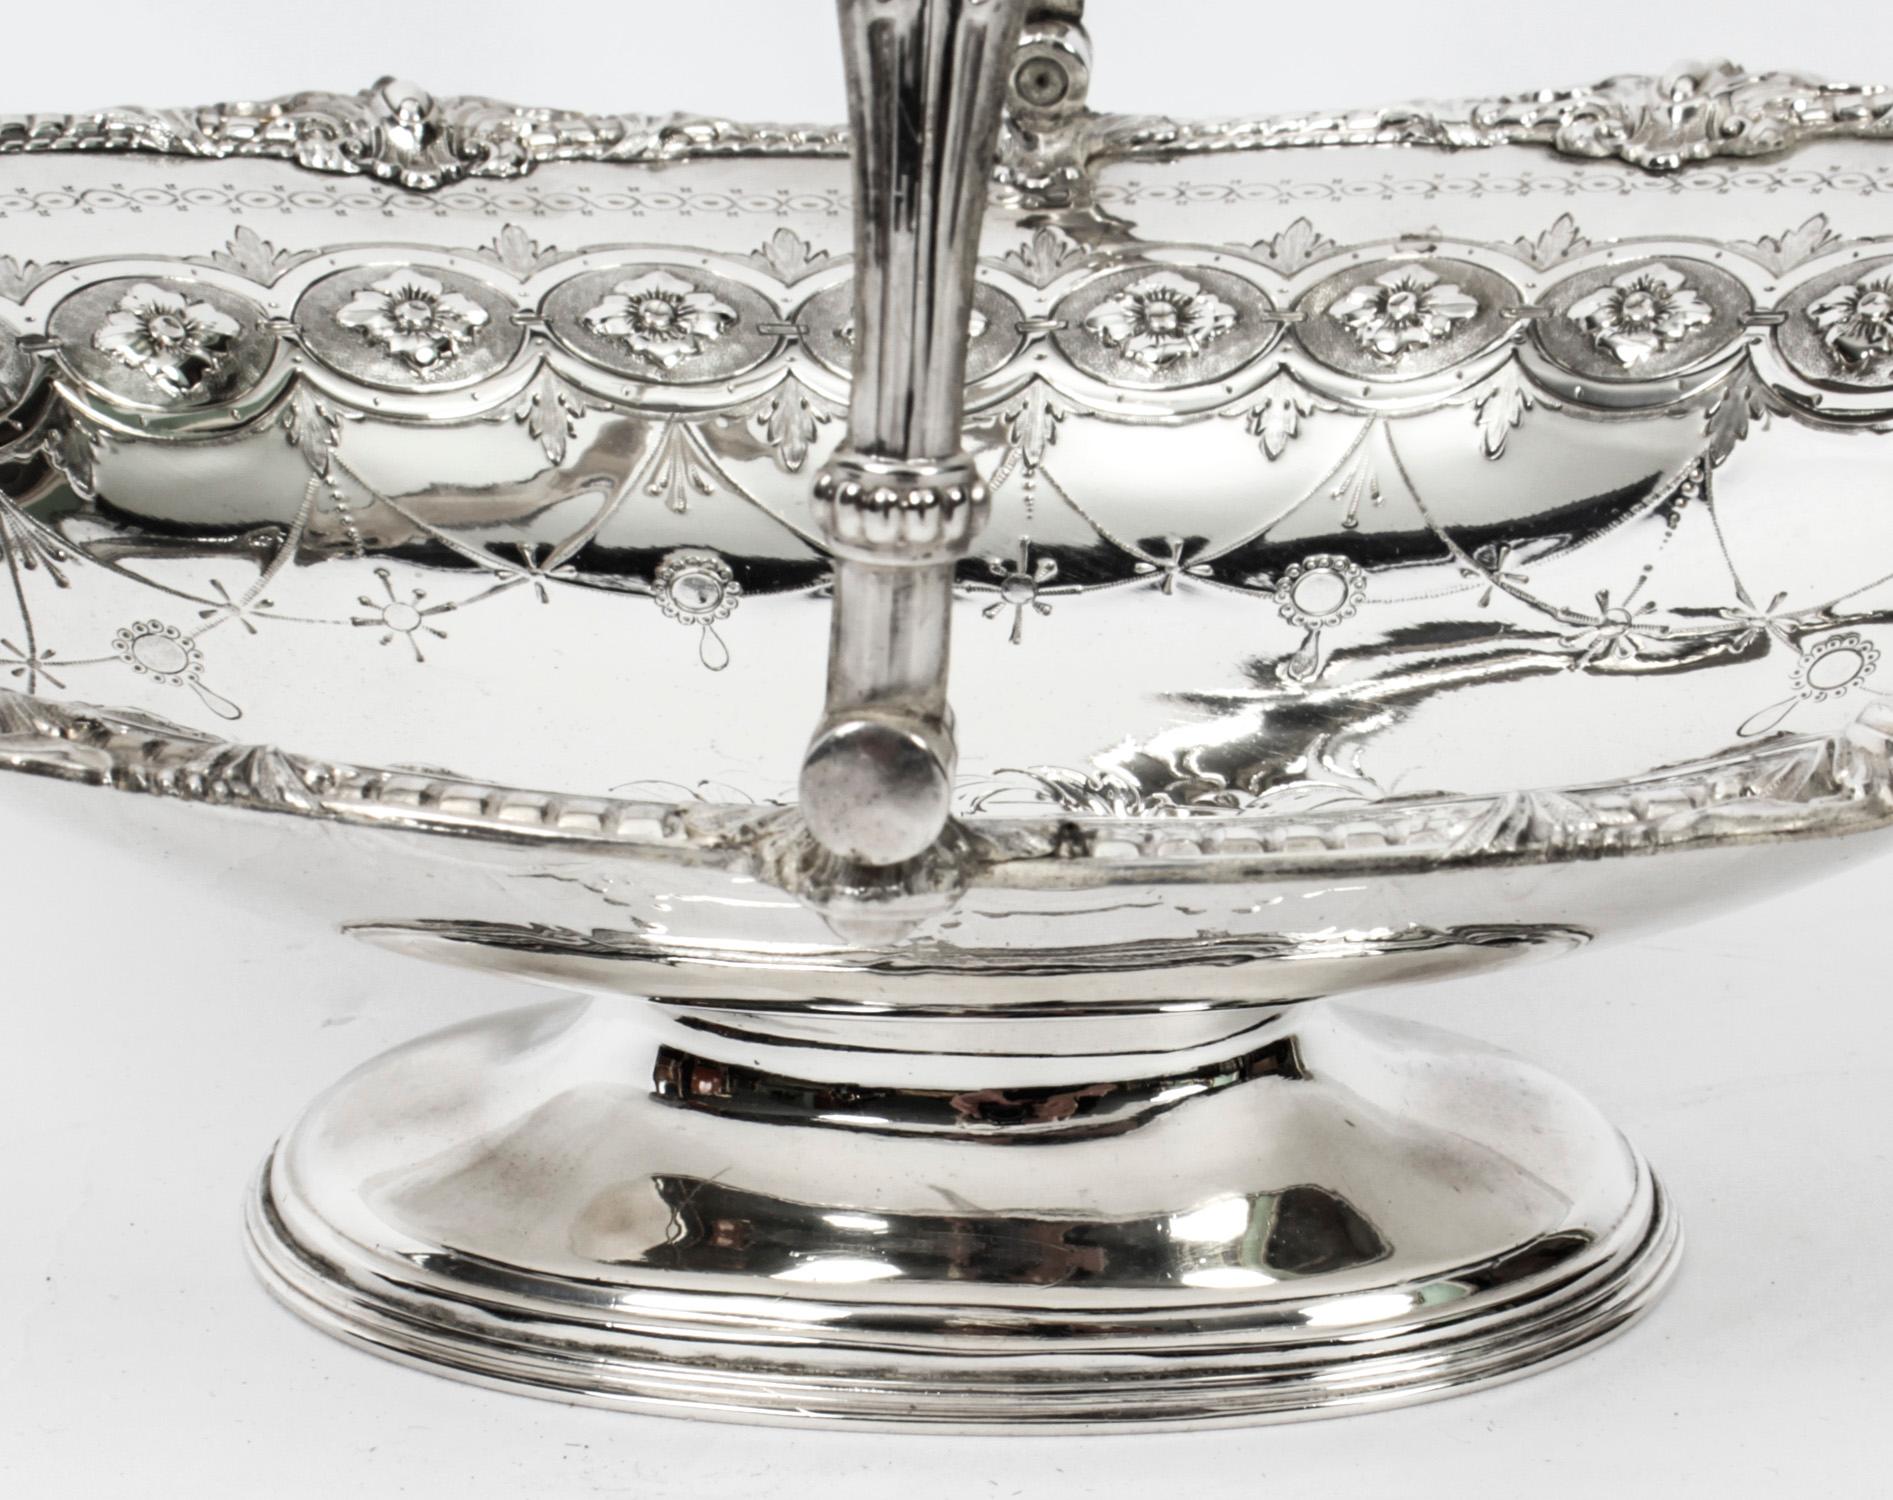 Late 19th Century Antique Silver Plated Fruit Basket by Henry Atkins & Co 19th C